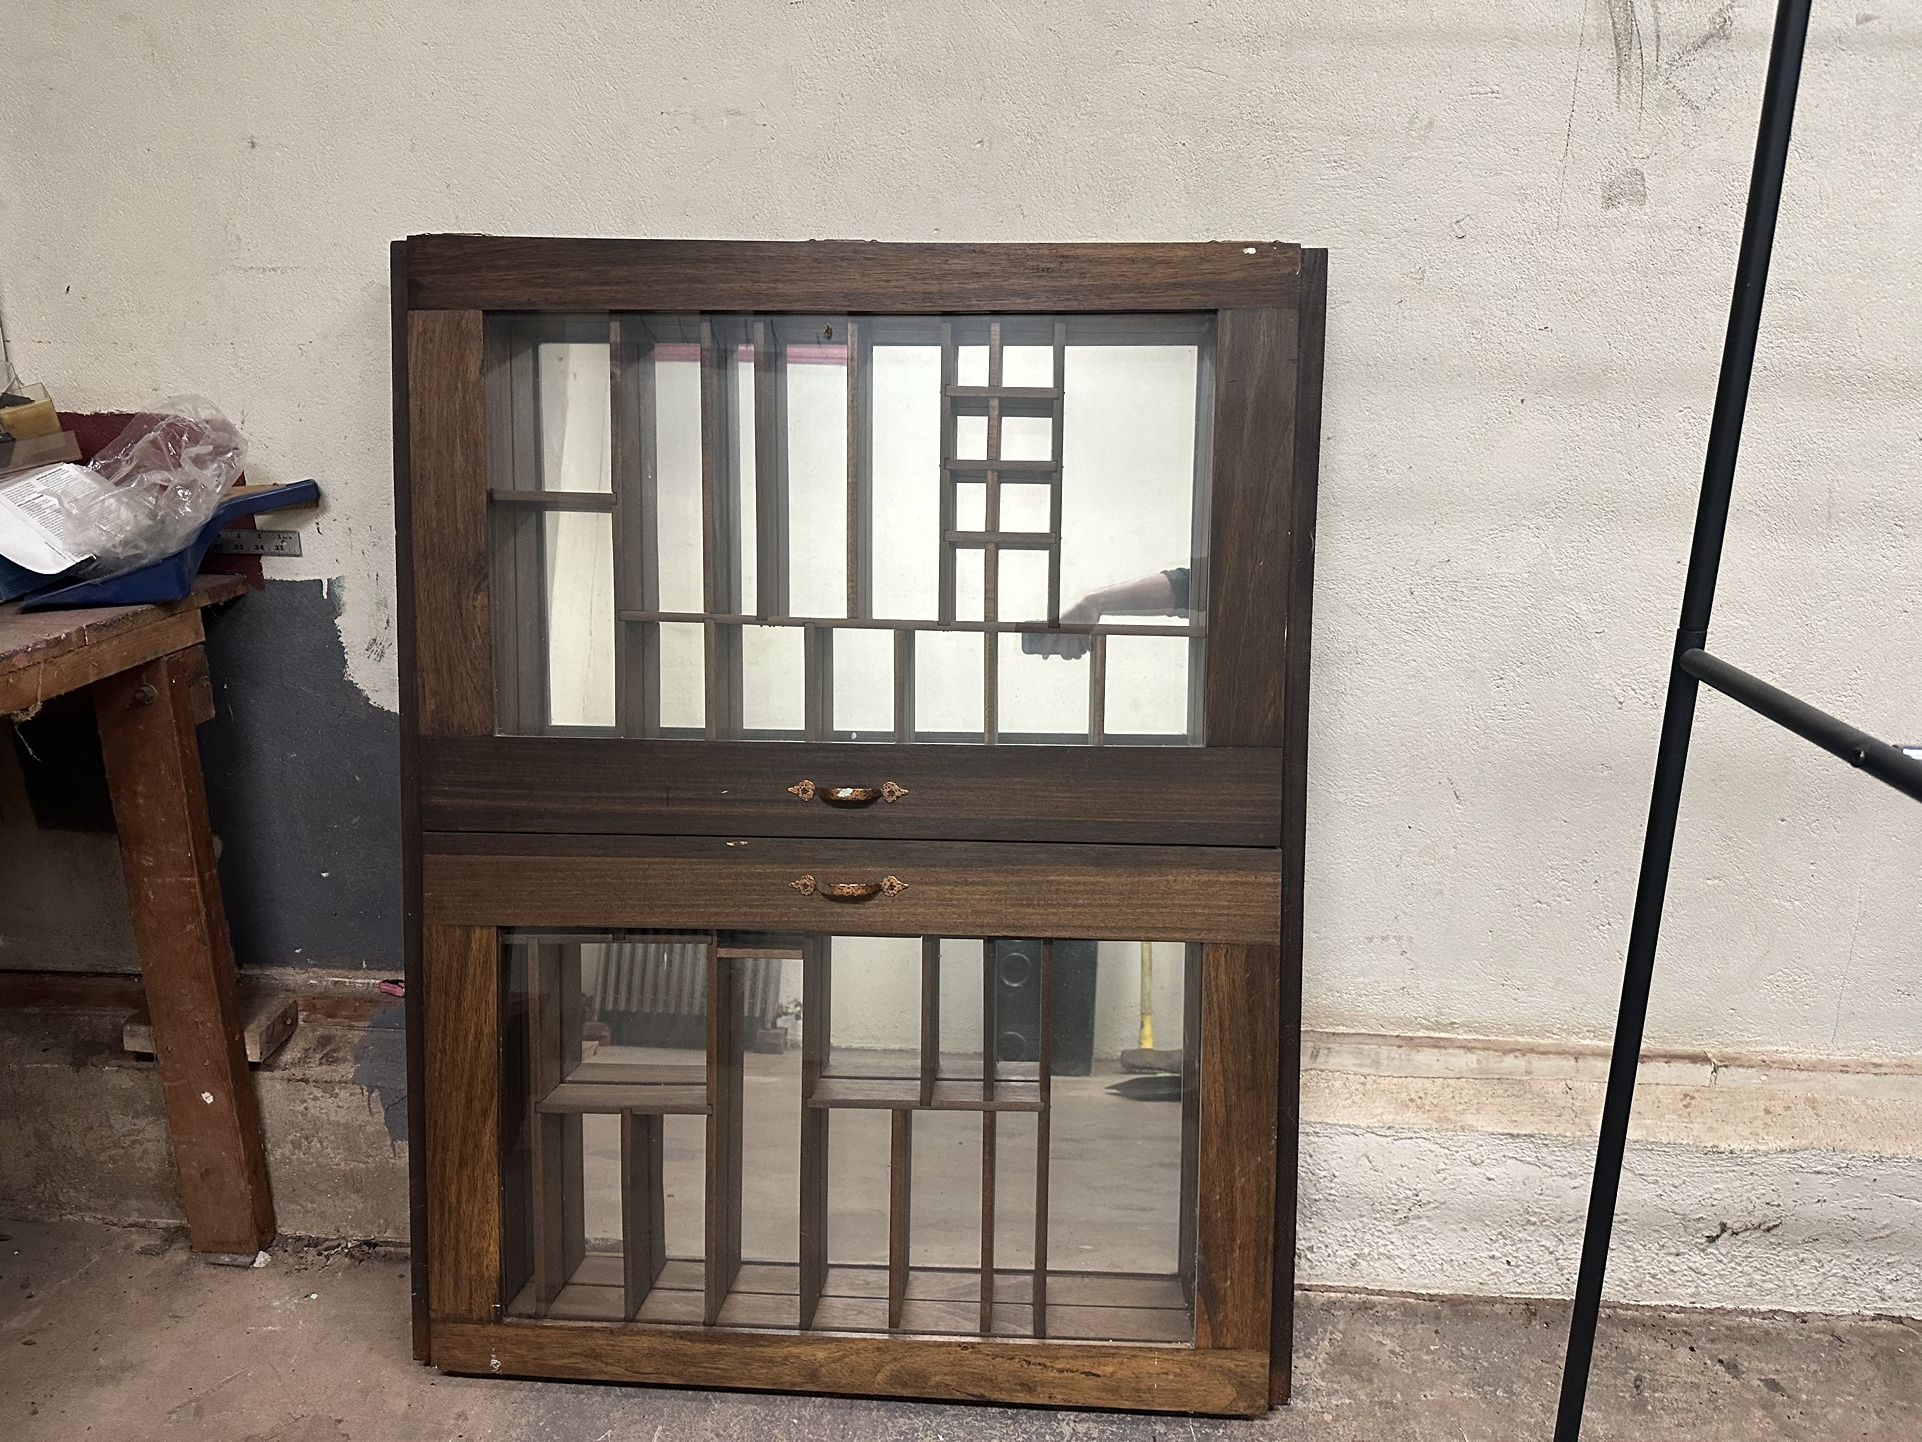 Antique Narrow Mirrored Wall Cabinet